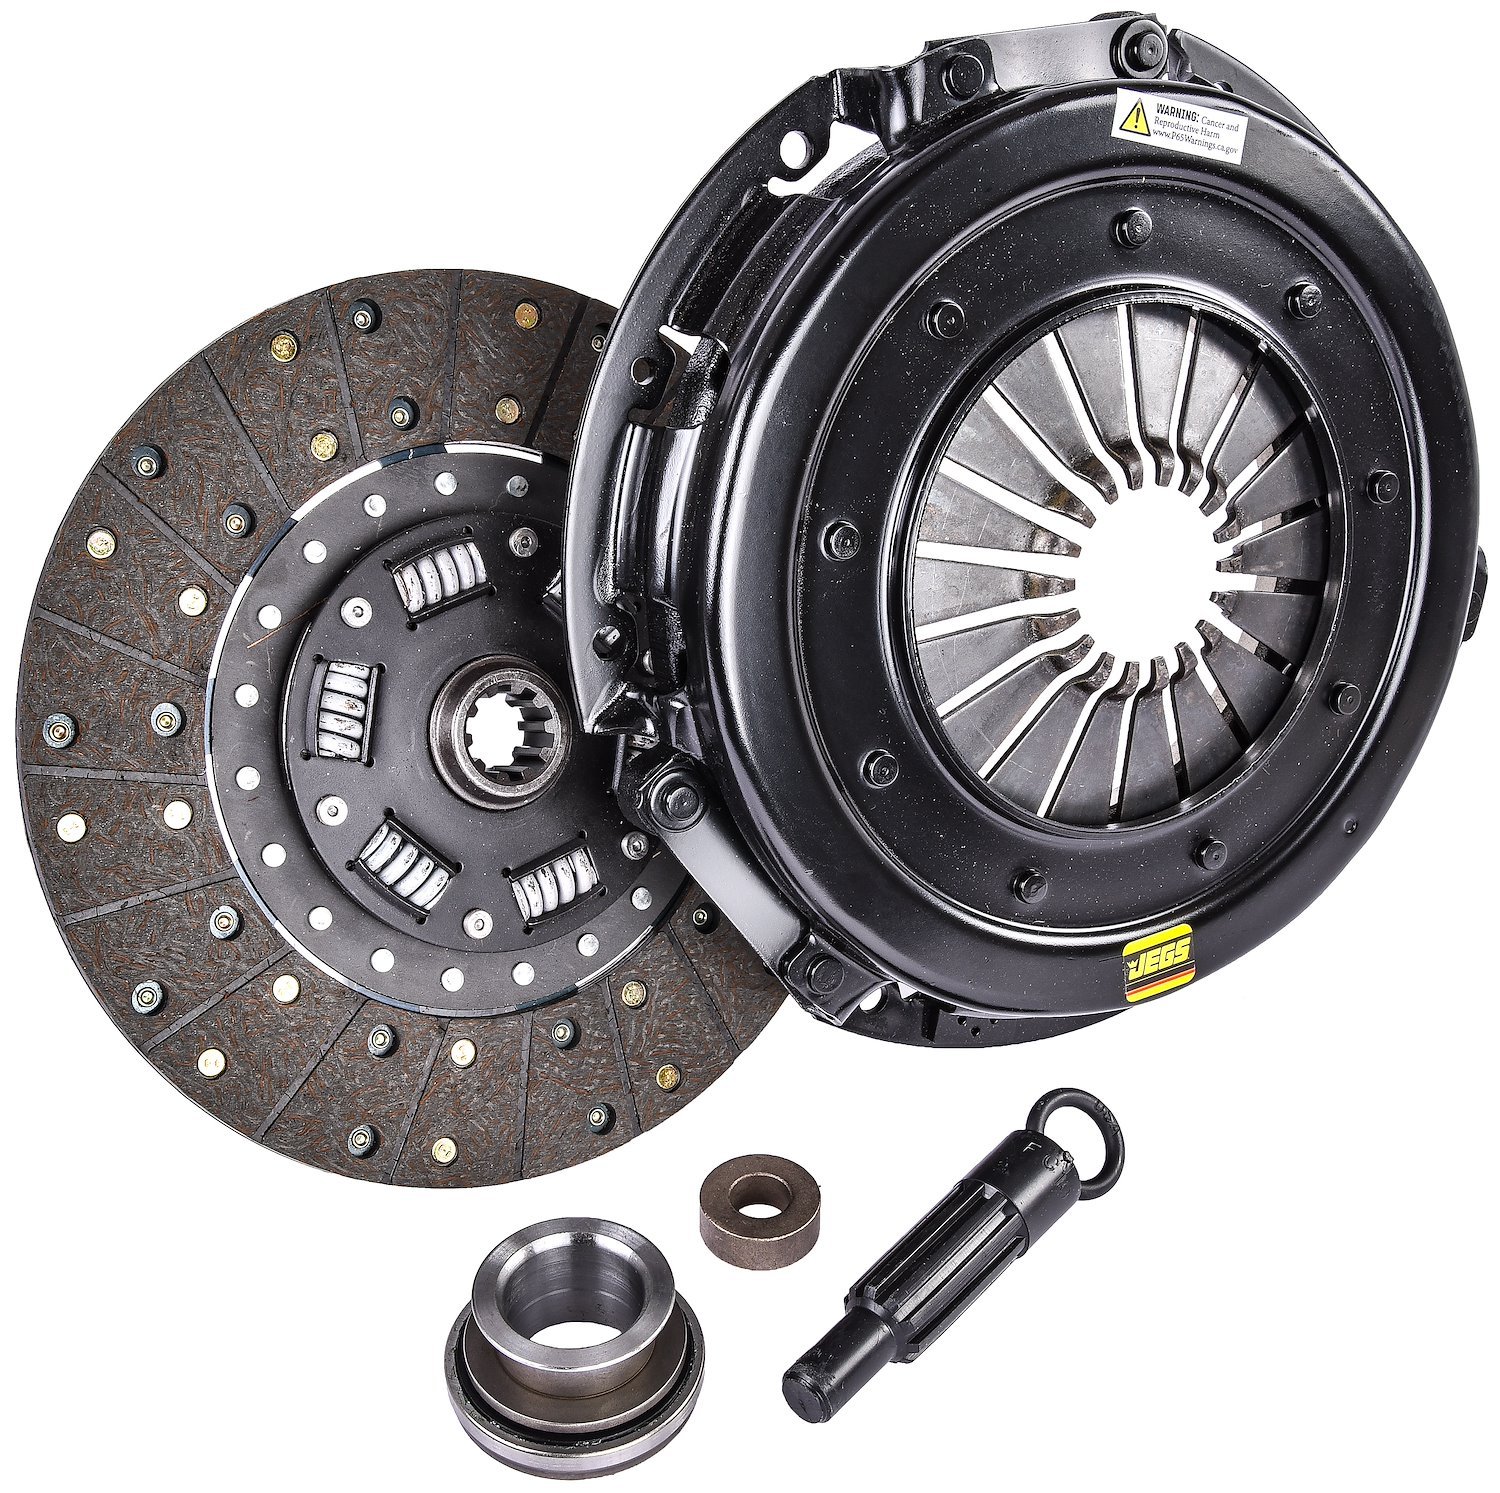 Street Performance Clutch Kit for 1986-2001 Ford Mustang